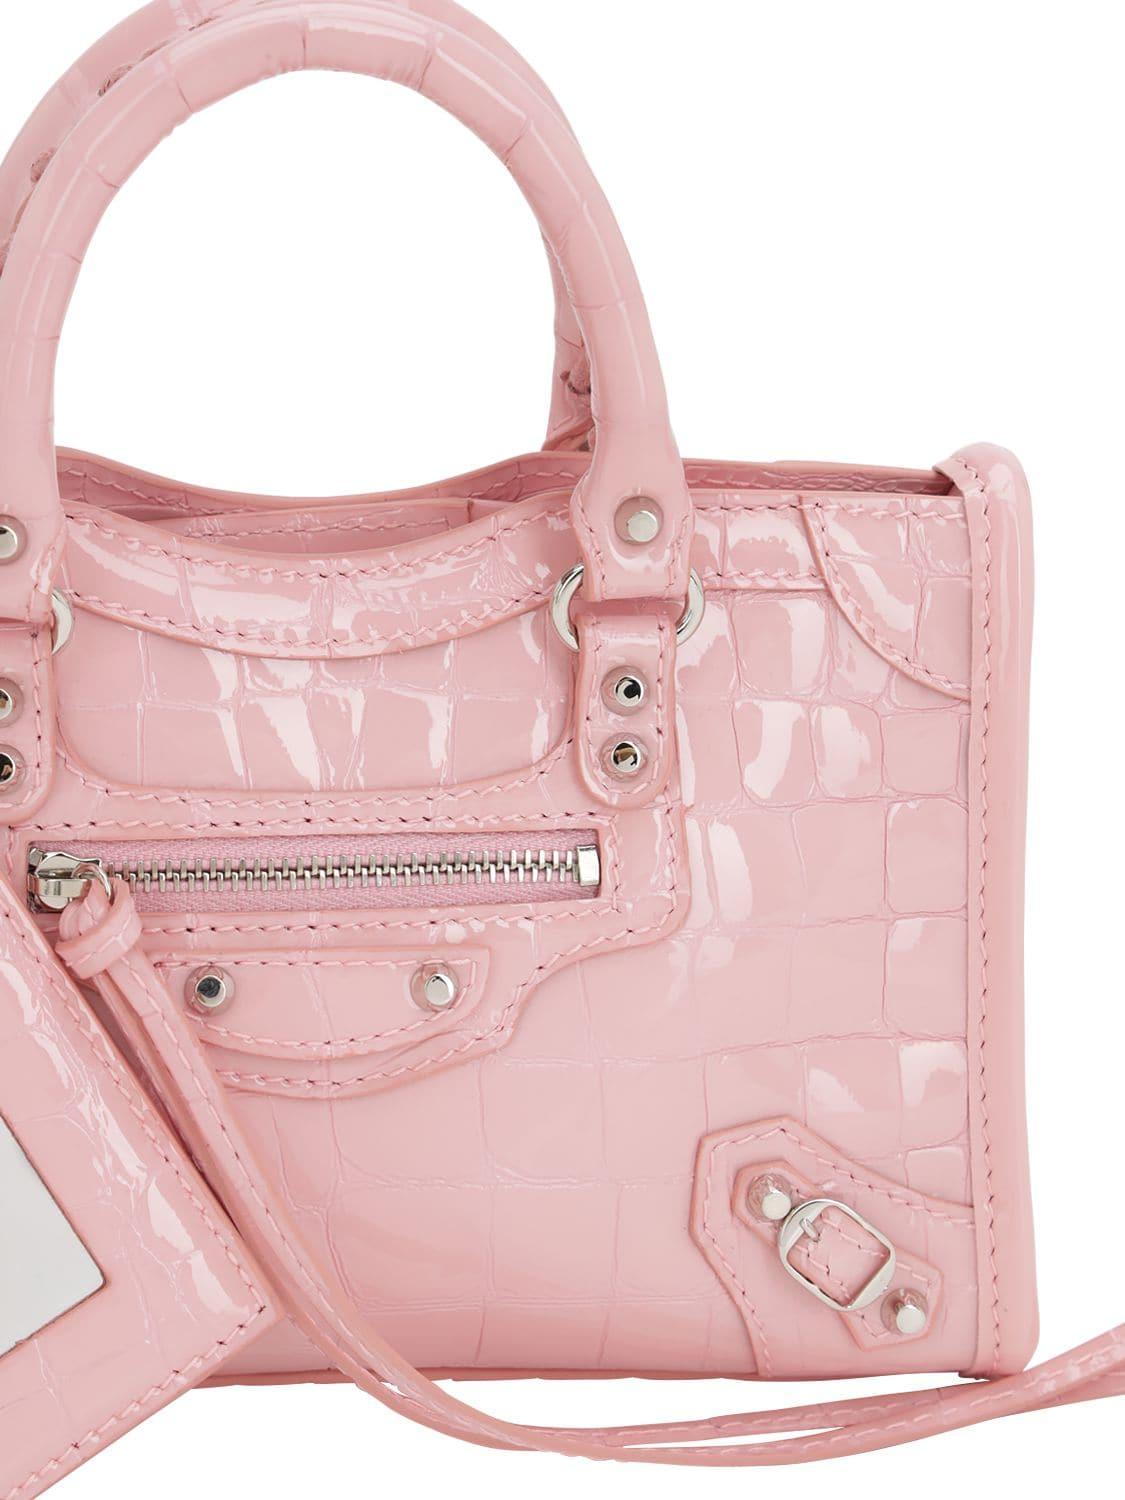 Balenciaga Nano City Croc Embossed Leather Bag in Pink | Lyst